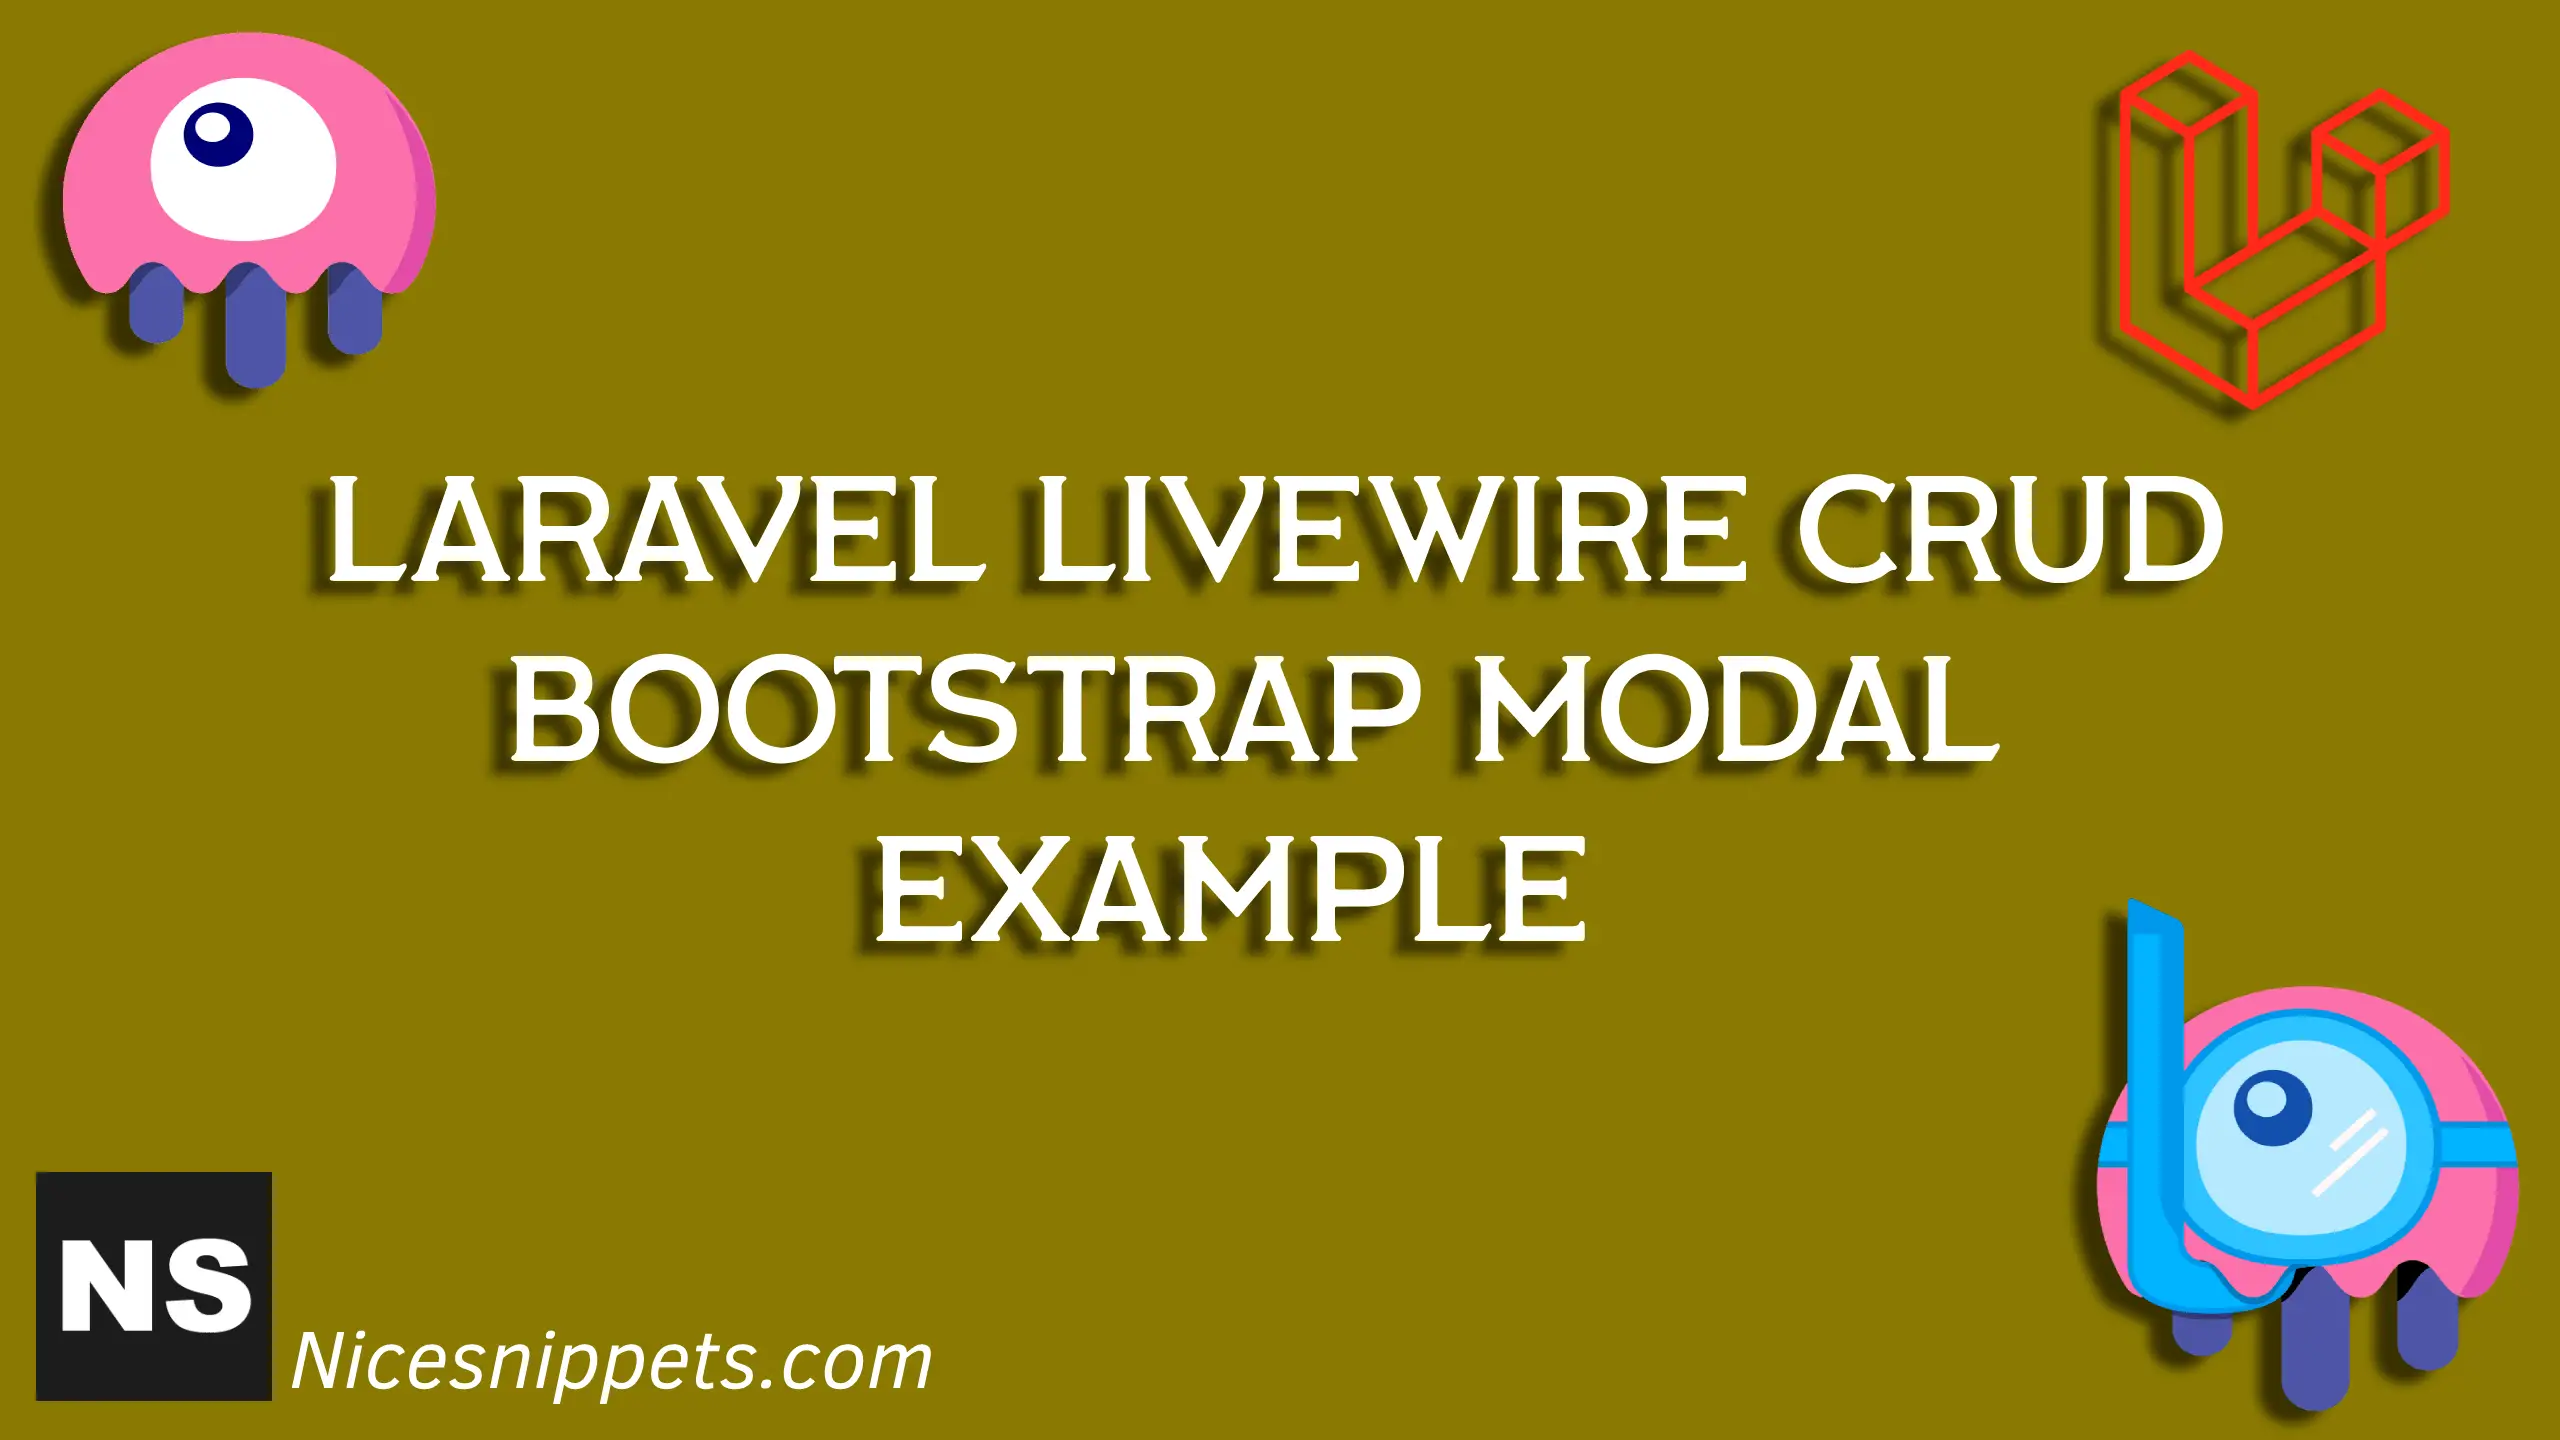 Laravel Livewire Crud with Bootstrap Modal Example